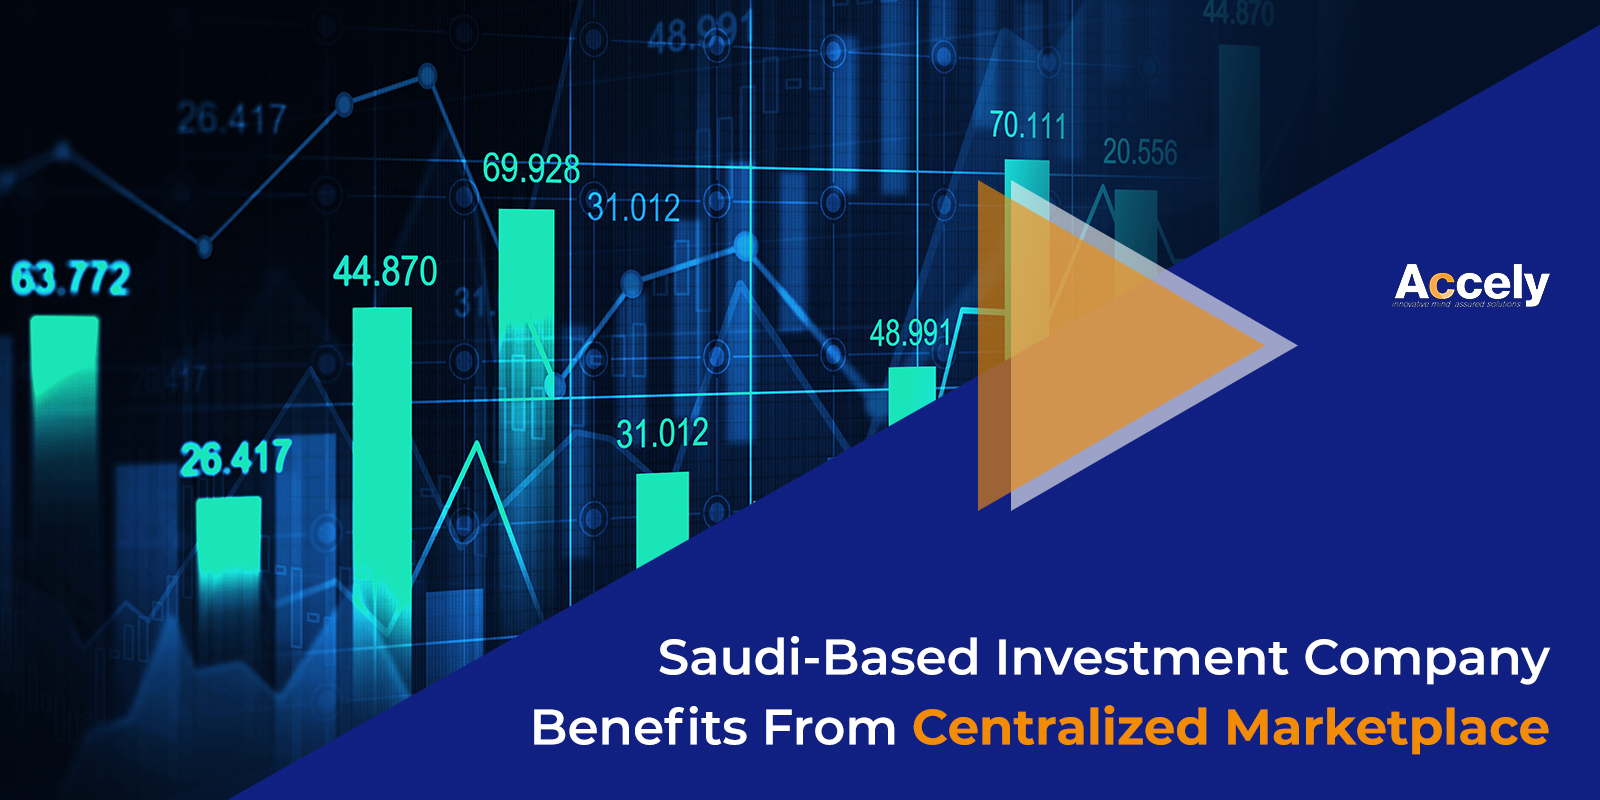 Saudi-Based Investment Company Benefits from Centralized Marketplace